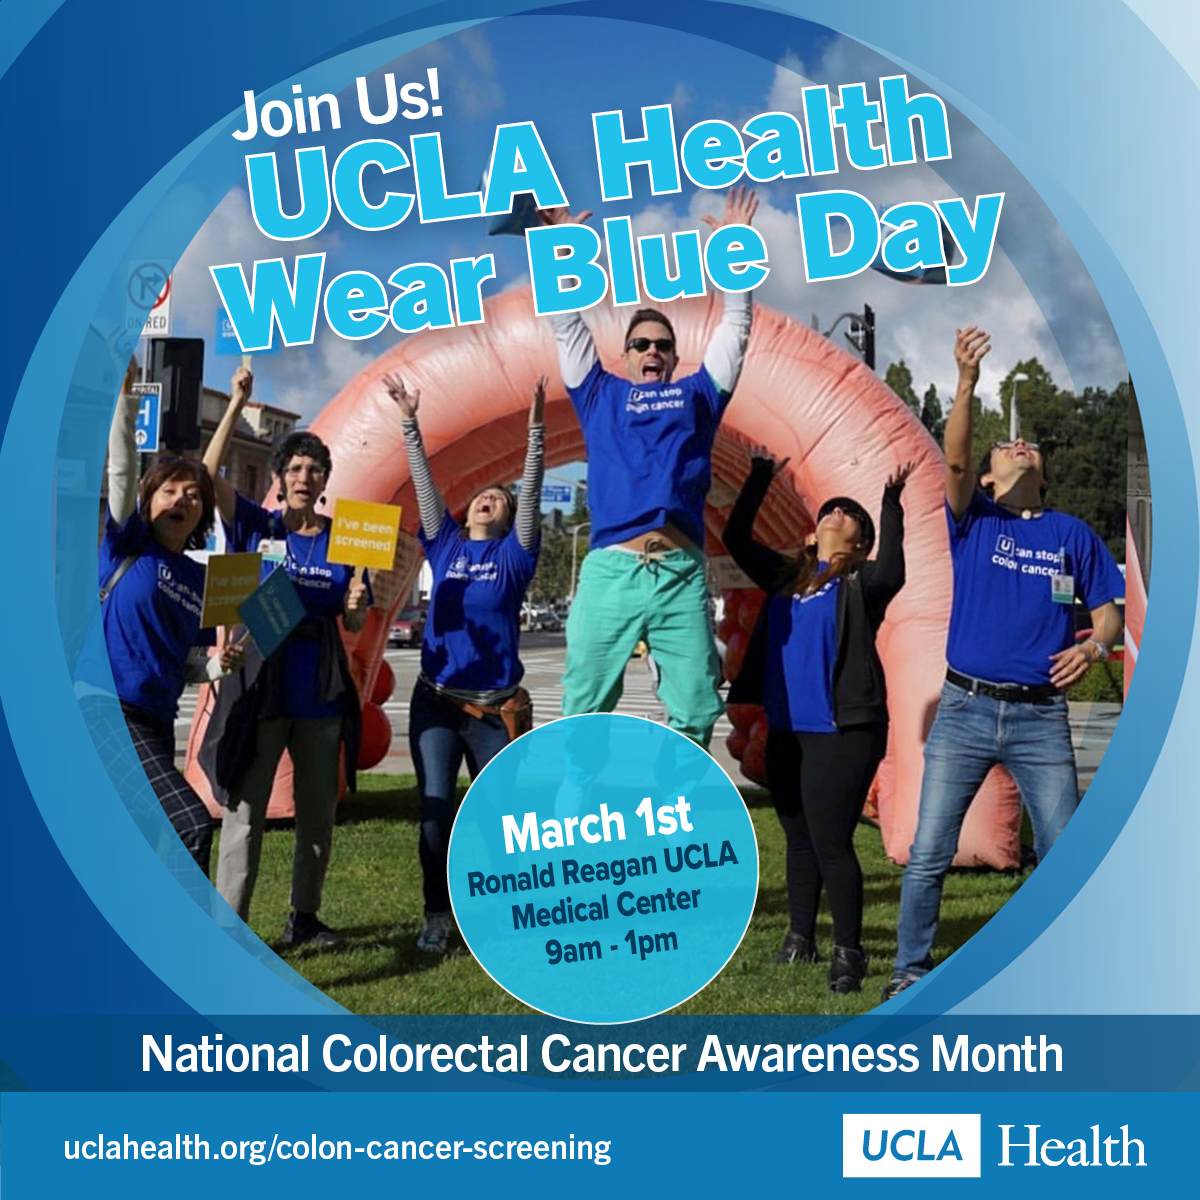 We 💙 #ColorectalCancerAwarenessMonth! Join @UCLAHealth March 1 for education, awareness & FUN! 🔹Inflatable colon 🔹 View cells🔬 @UCLA_Pathology 🔹Genetic counselors discuss hereditary #CRC 🔹Giveaways 👉 U can make a difference! #DressinBlue #GetScreened 4 #ColorectalCancer